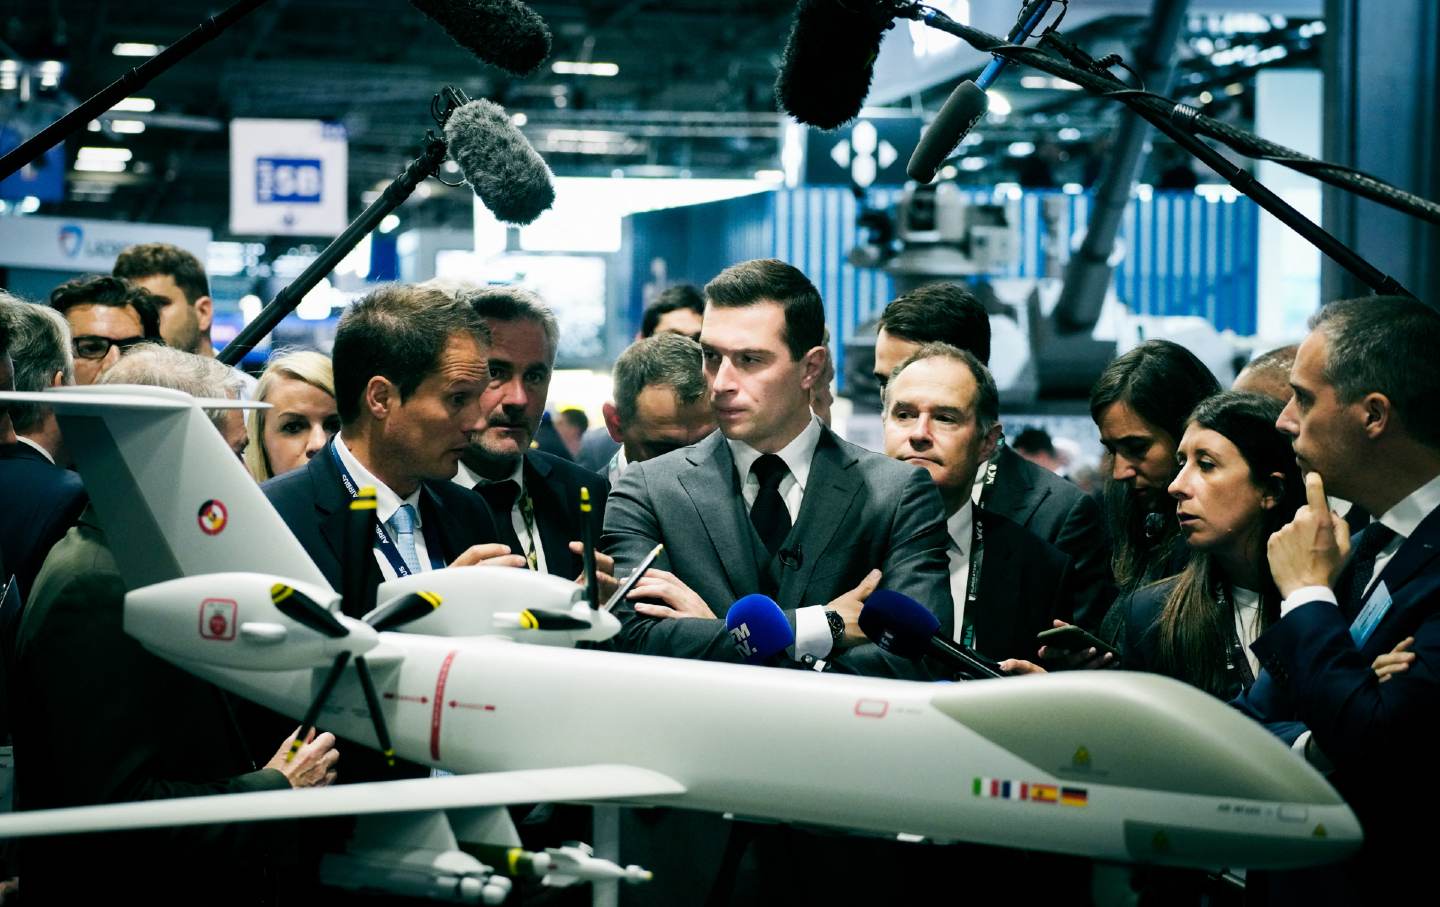 Jordan Bardella, president of the National Rally party, looks at an Airbus military drone model at the Eurosatory international expo in Villepinte, close to Paris, on June 19, 2024.